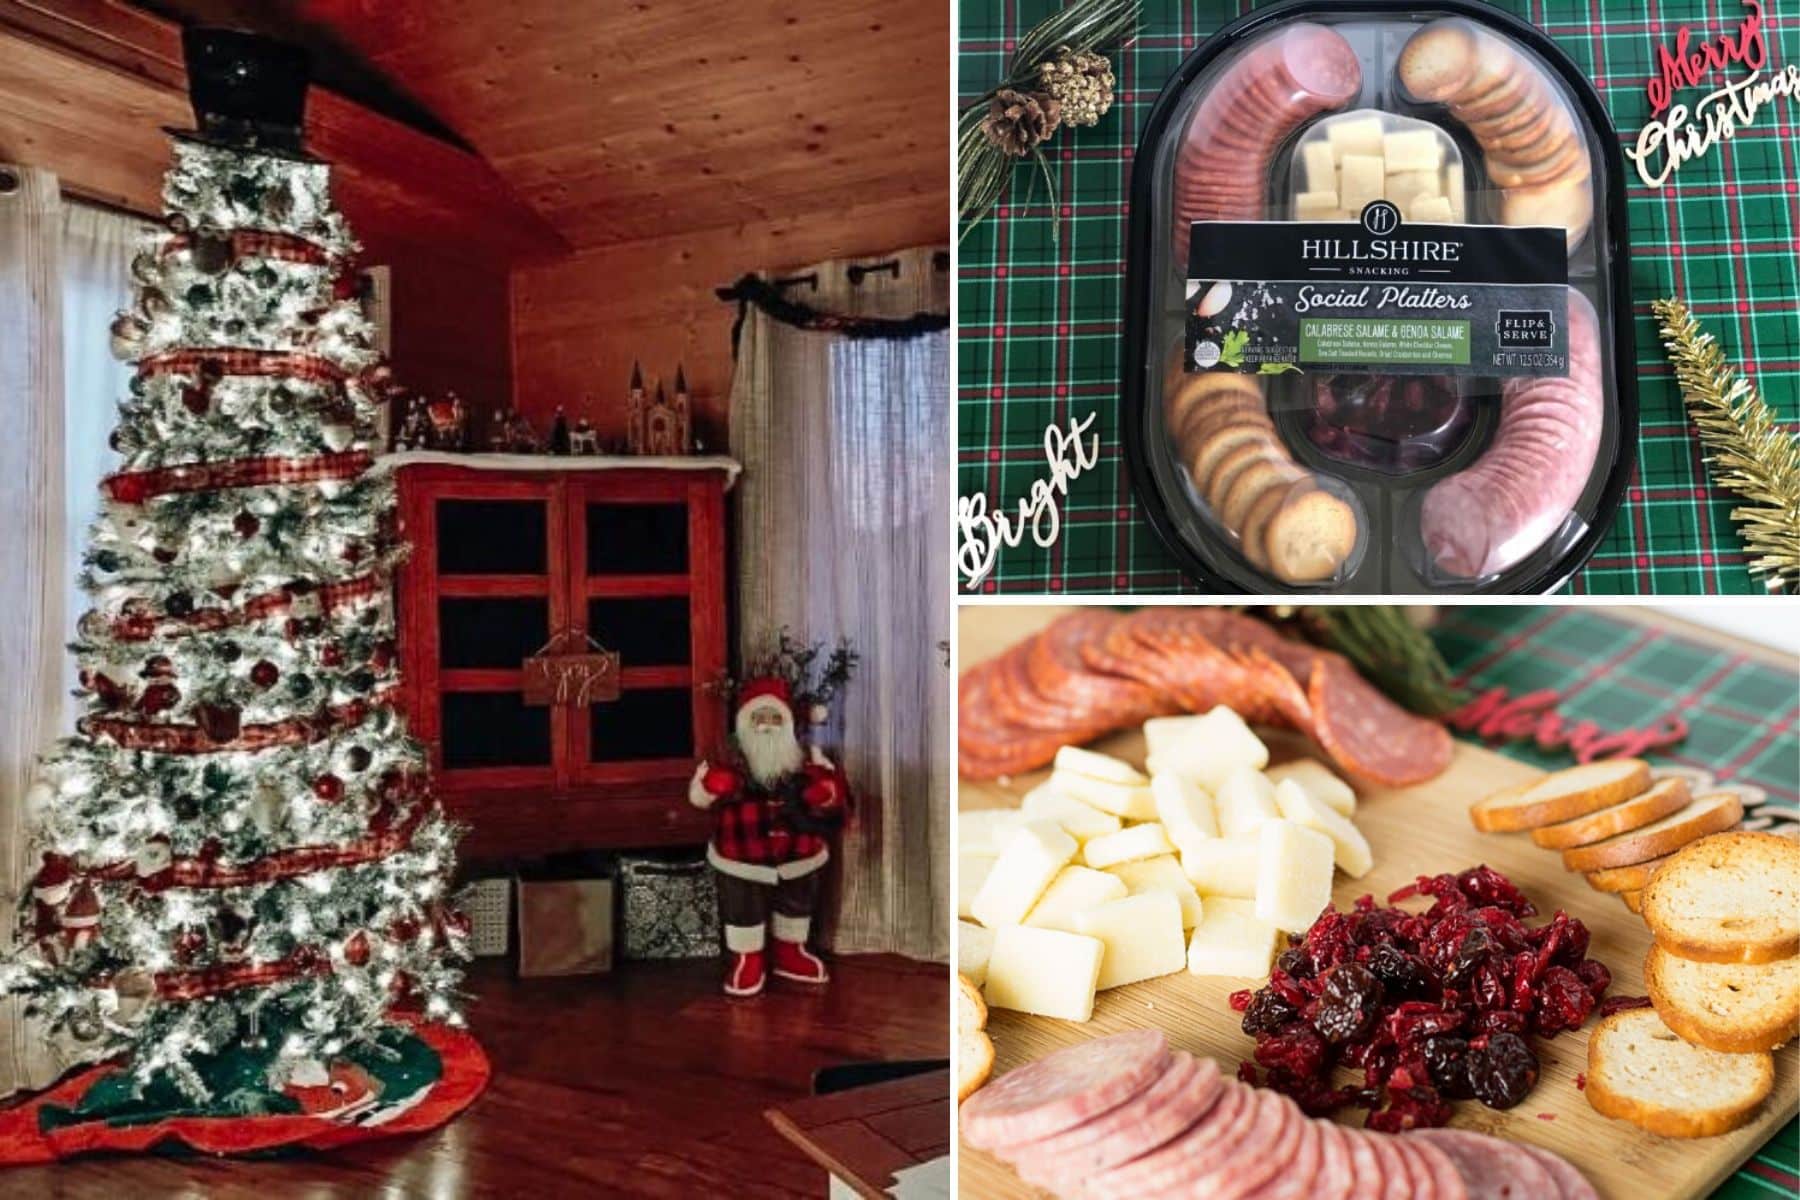 collage of home decorated for Christmas and the Hillshire Snacking Social Platters